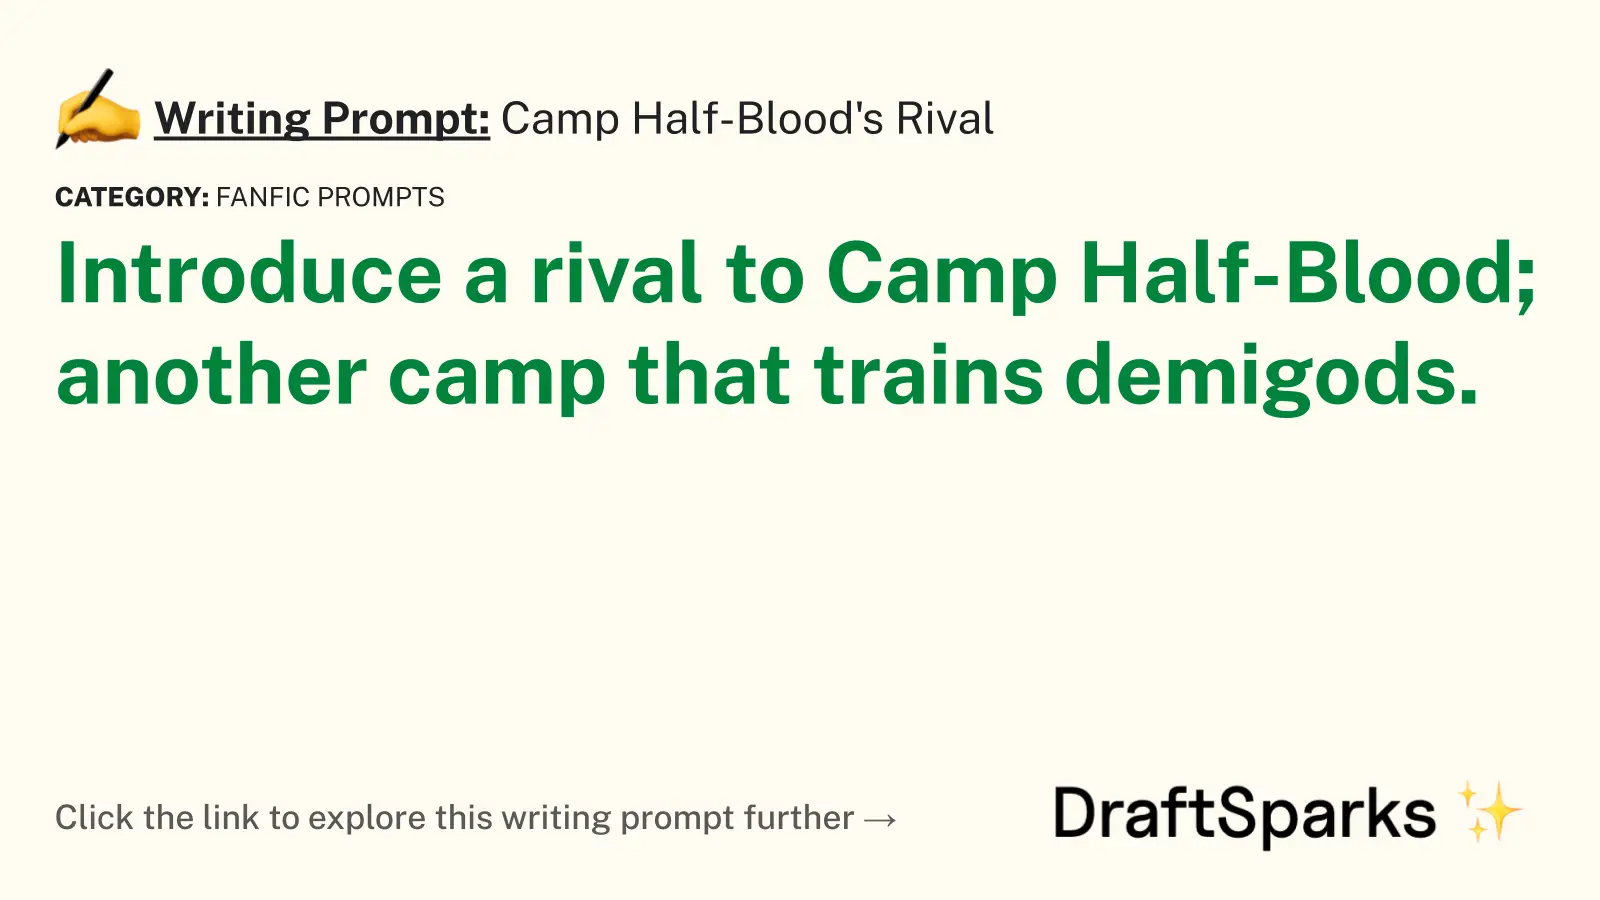 Camp Half-Blood’s Rival